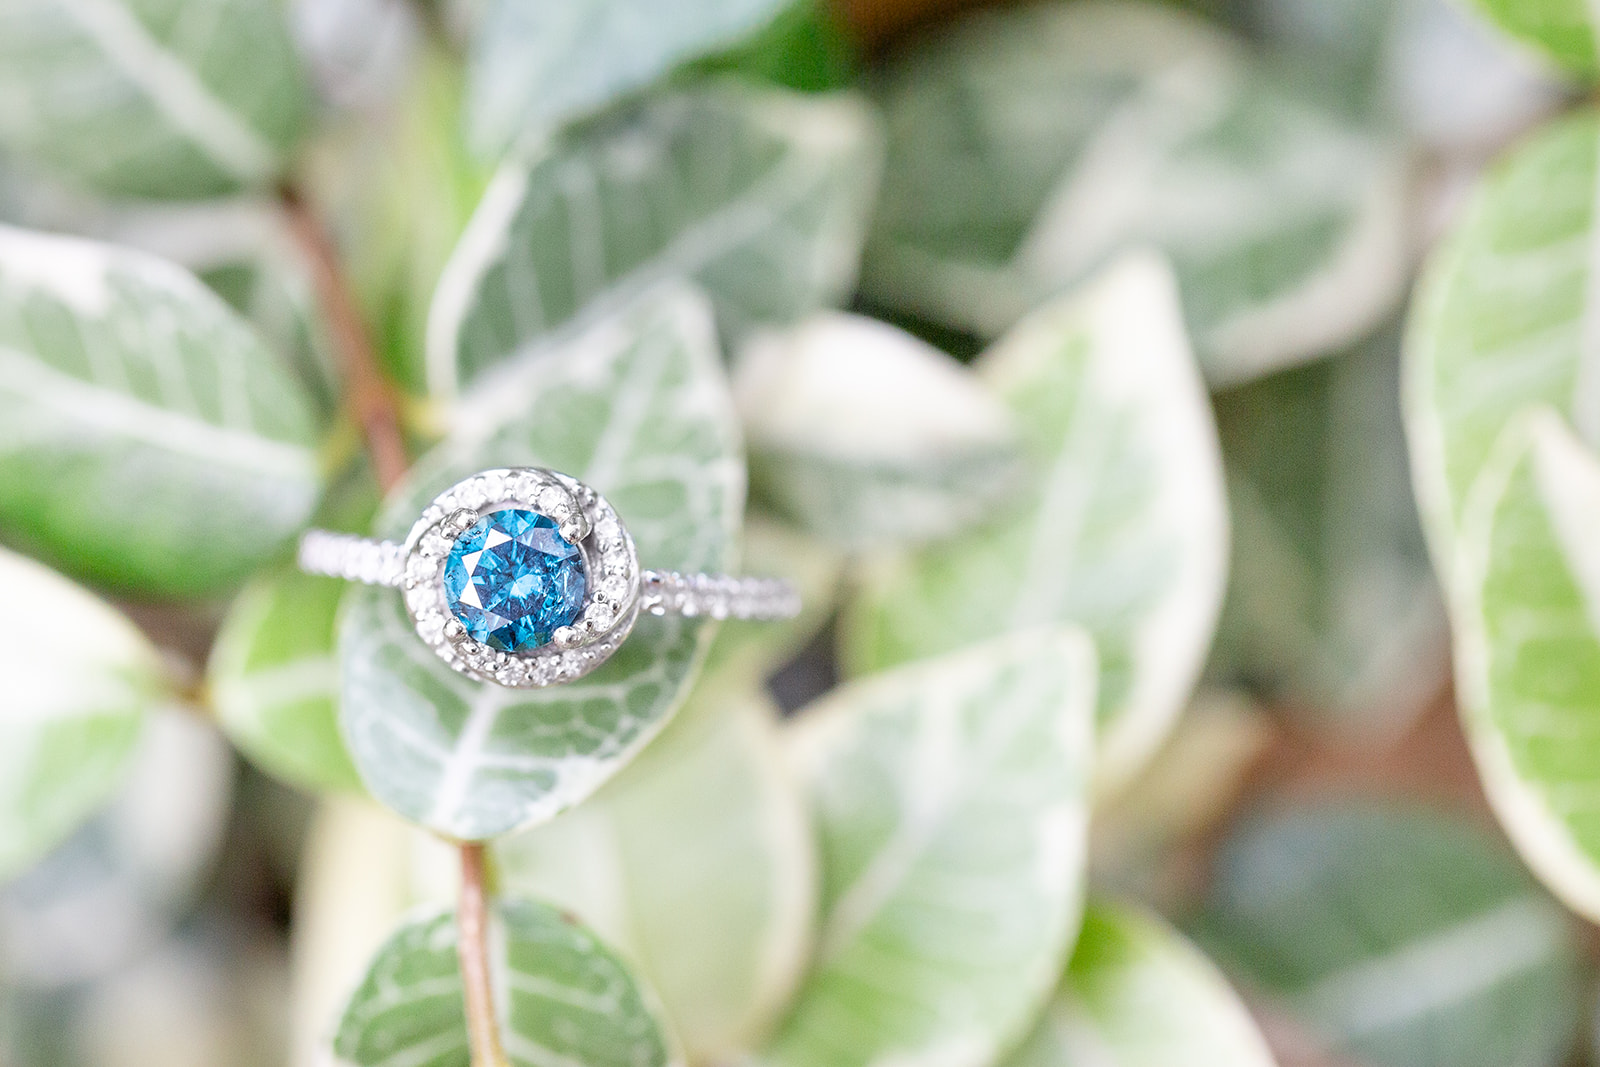 Blue ring with diamond halo engagement ring on leaves